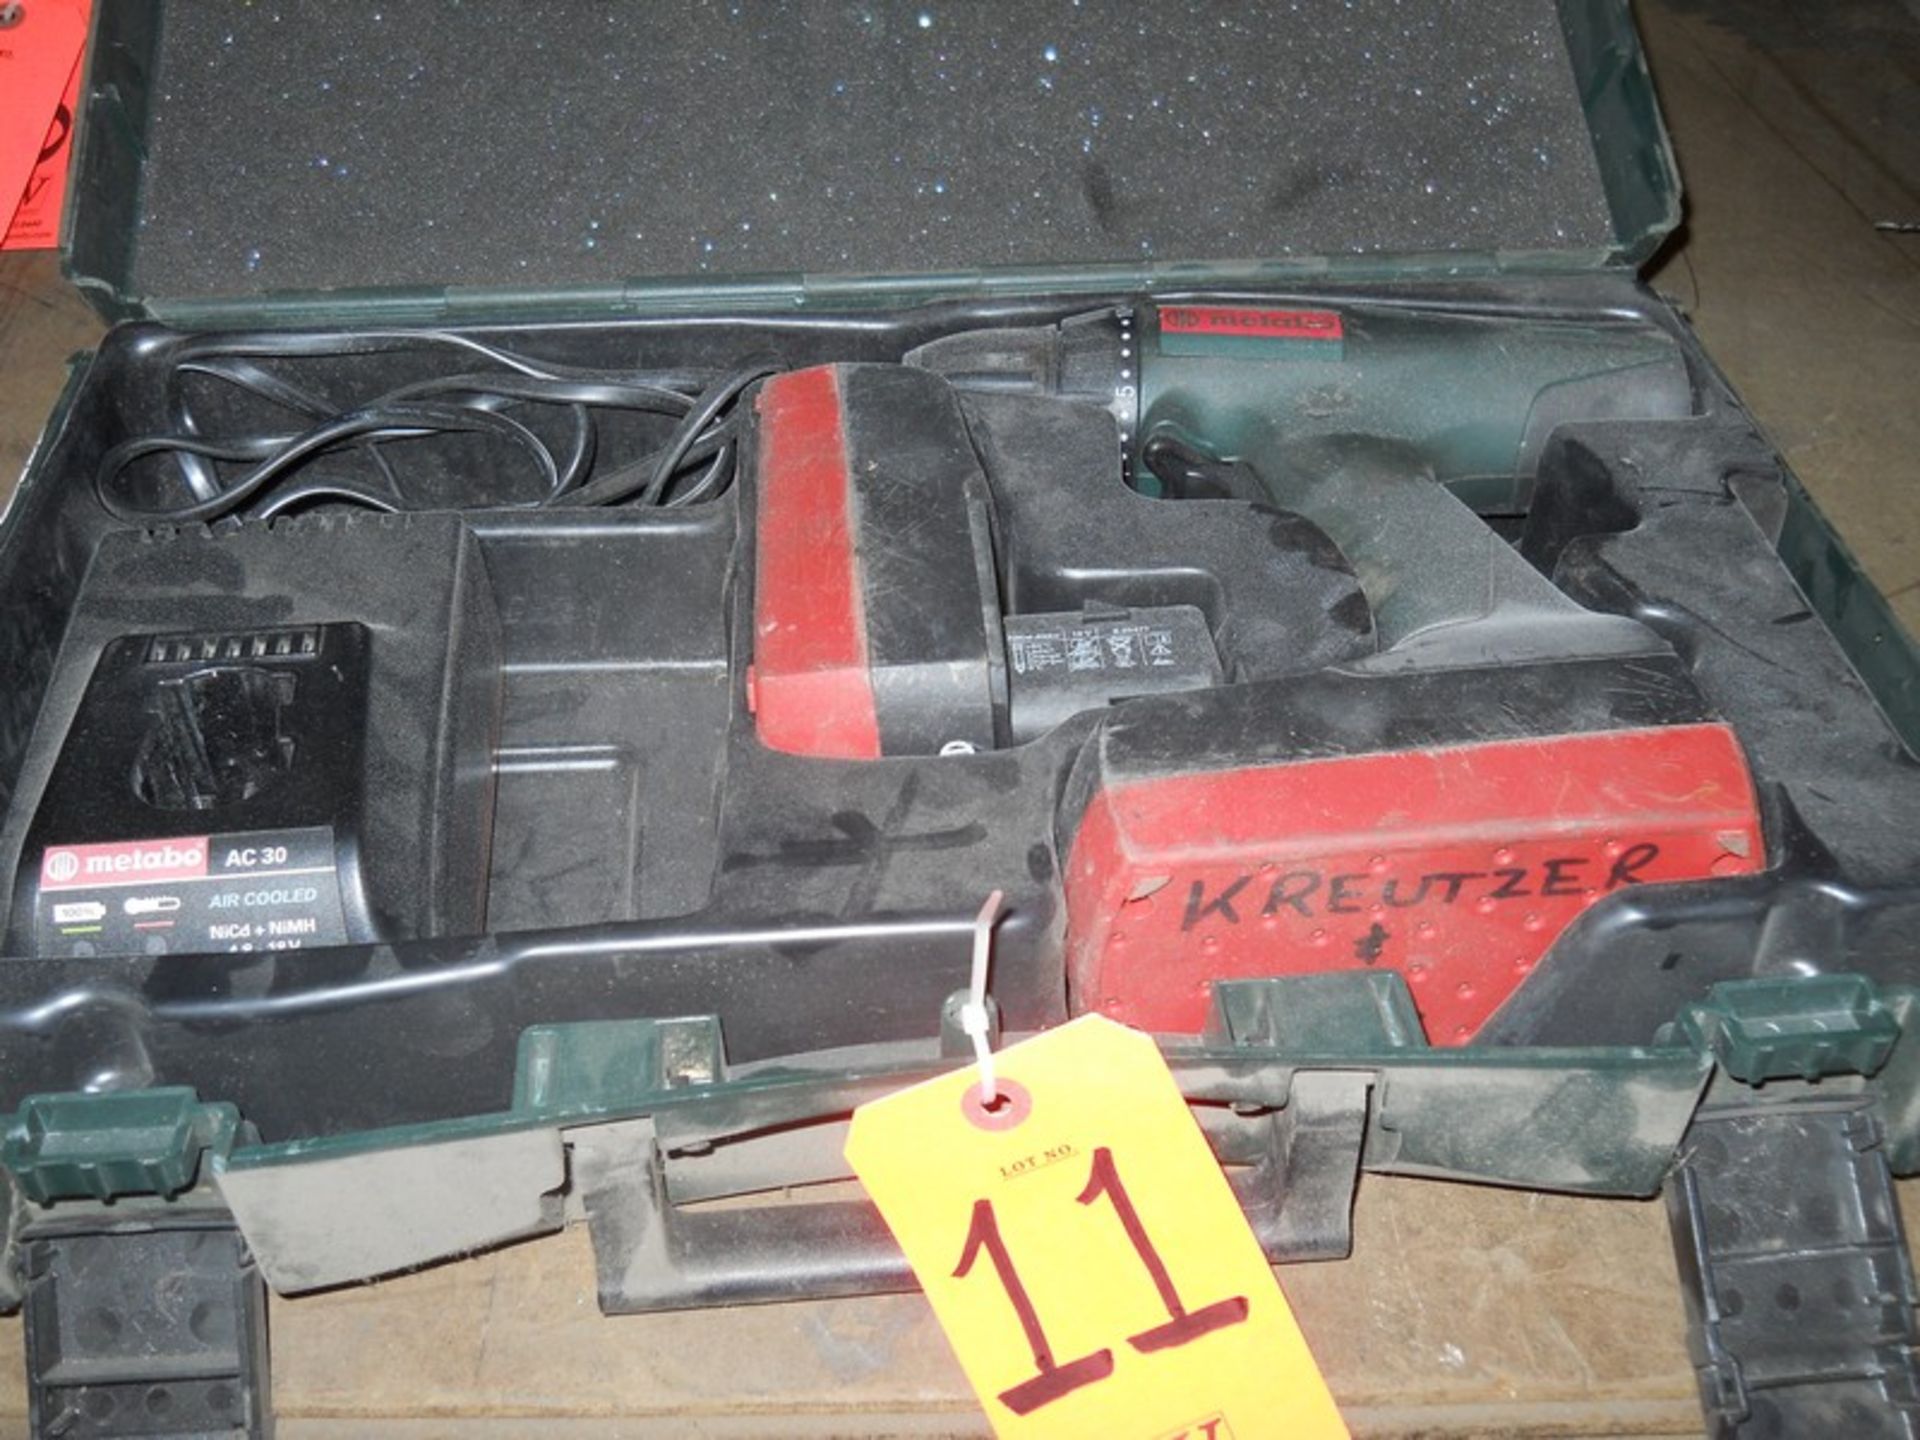 Metabo Battery Powered Electric Drill; with Charger, Battery & Power Cord, in Plastic Carry Case